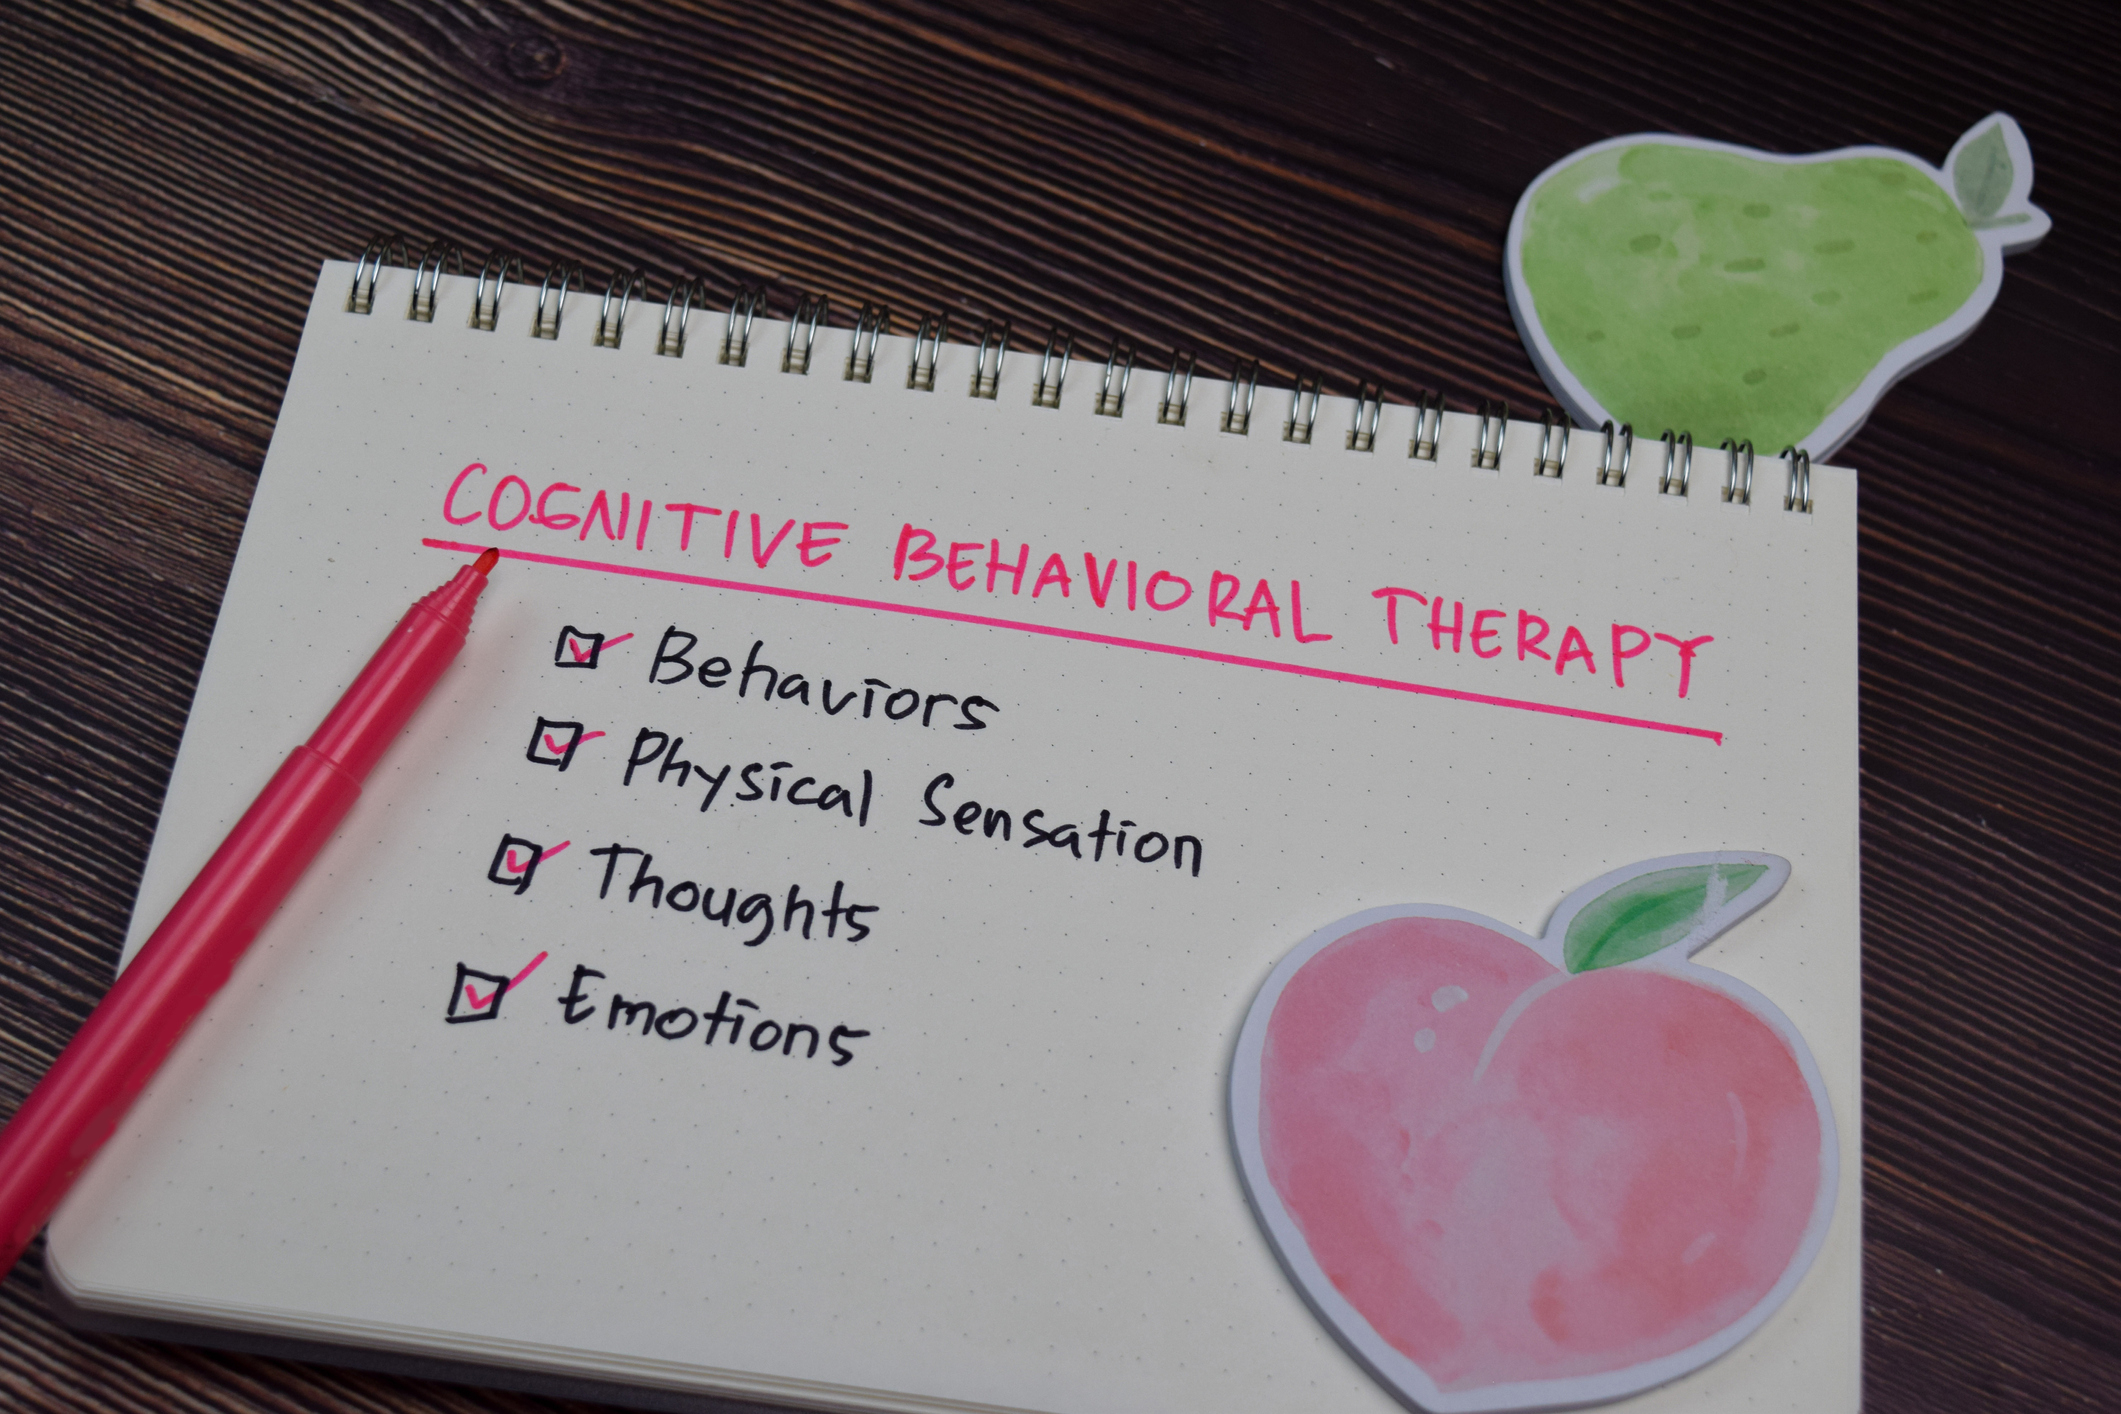 A cognitive behavioral therapy checklist that lists behaviors, physical sensation, thoughts, emotion